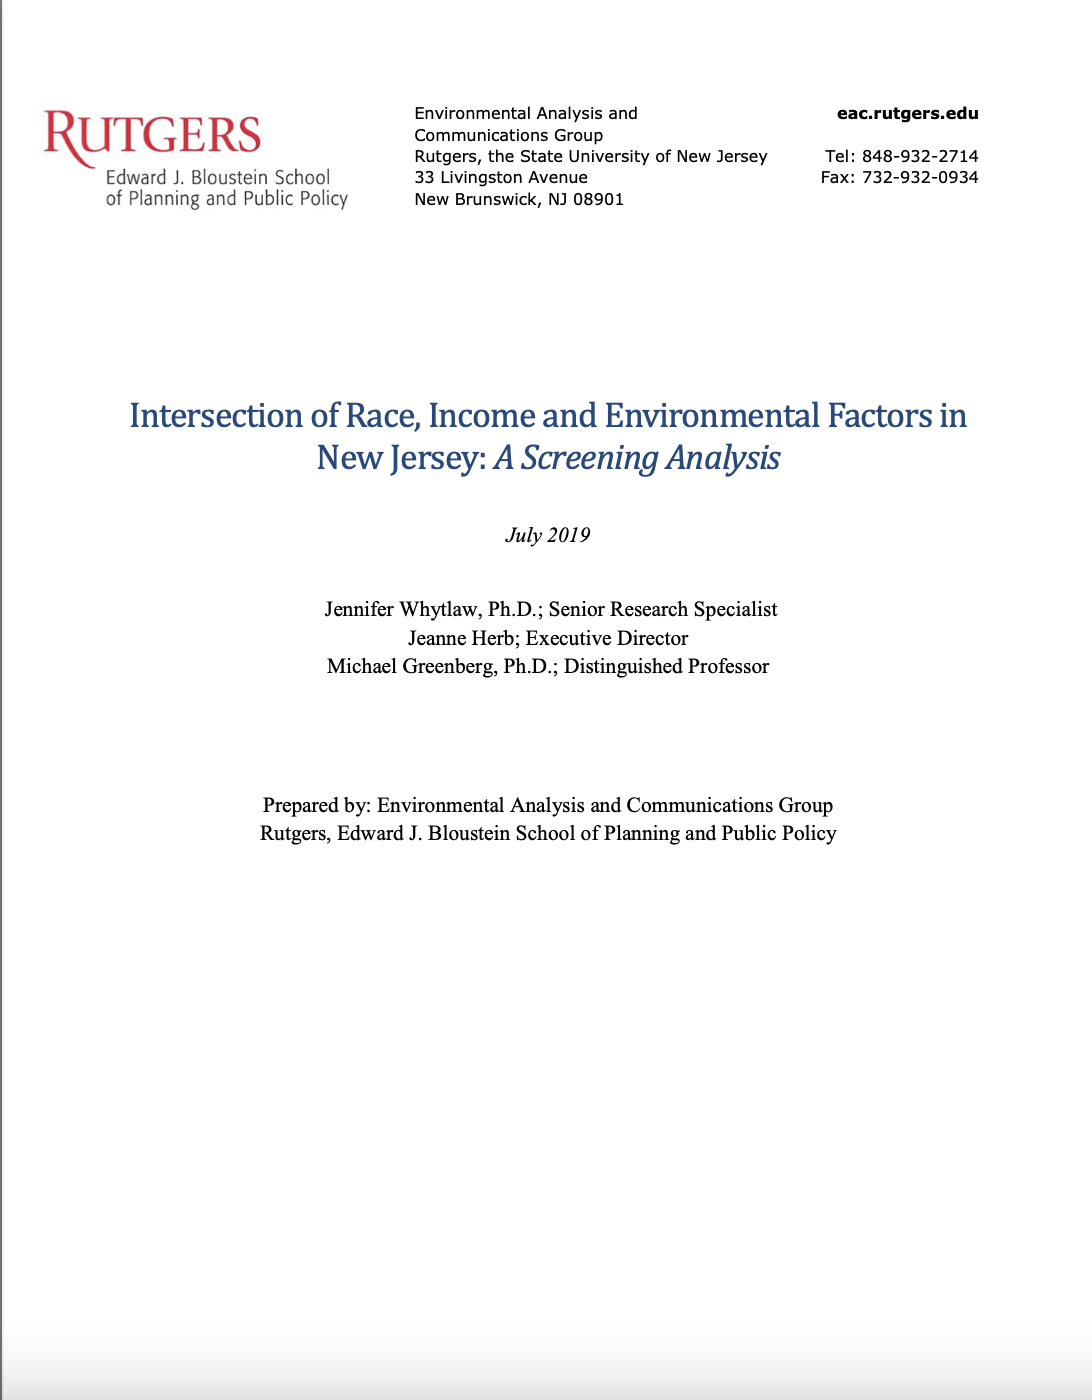 Intersection of Race, Income and Environmental Factors in New Jersey